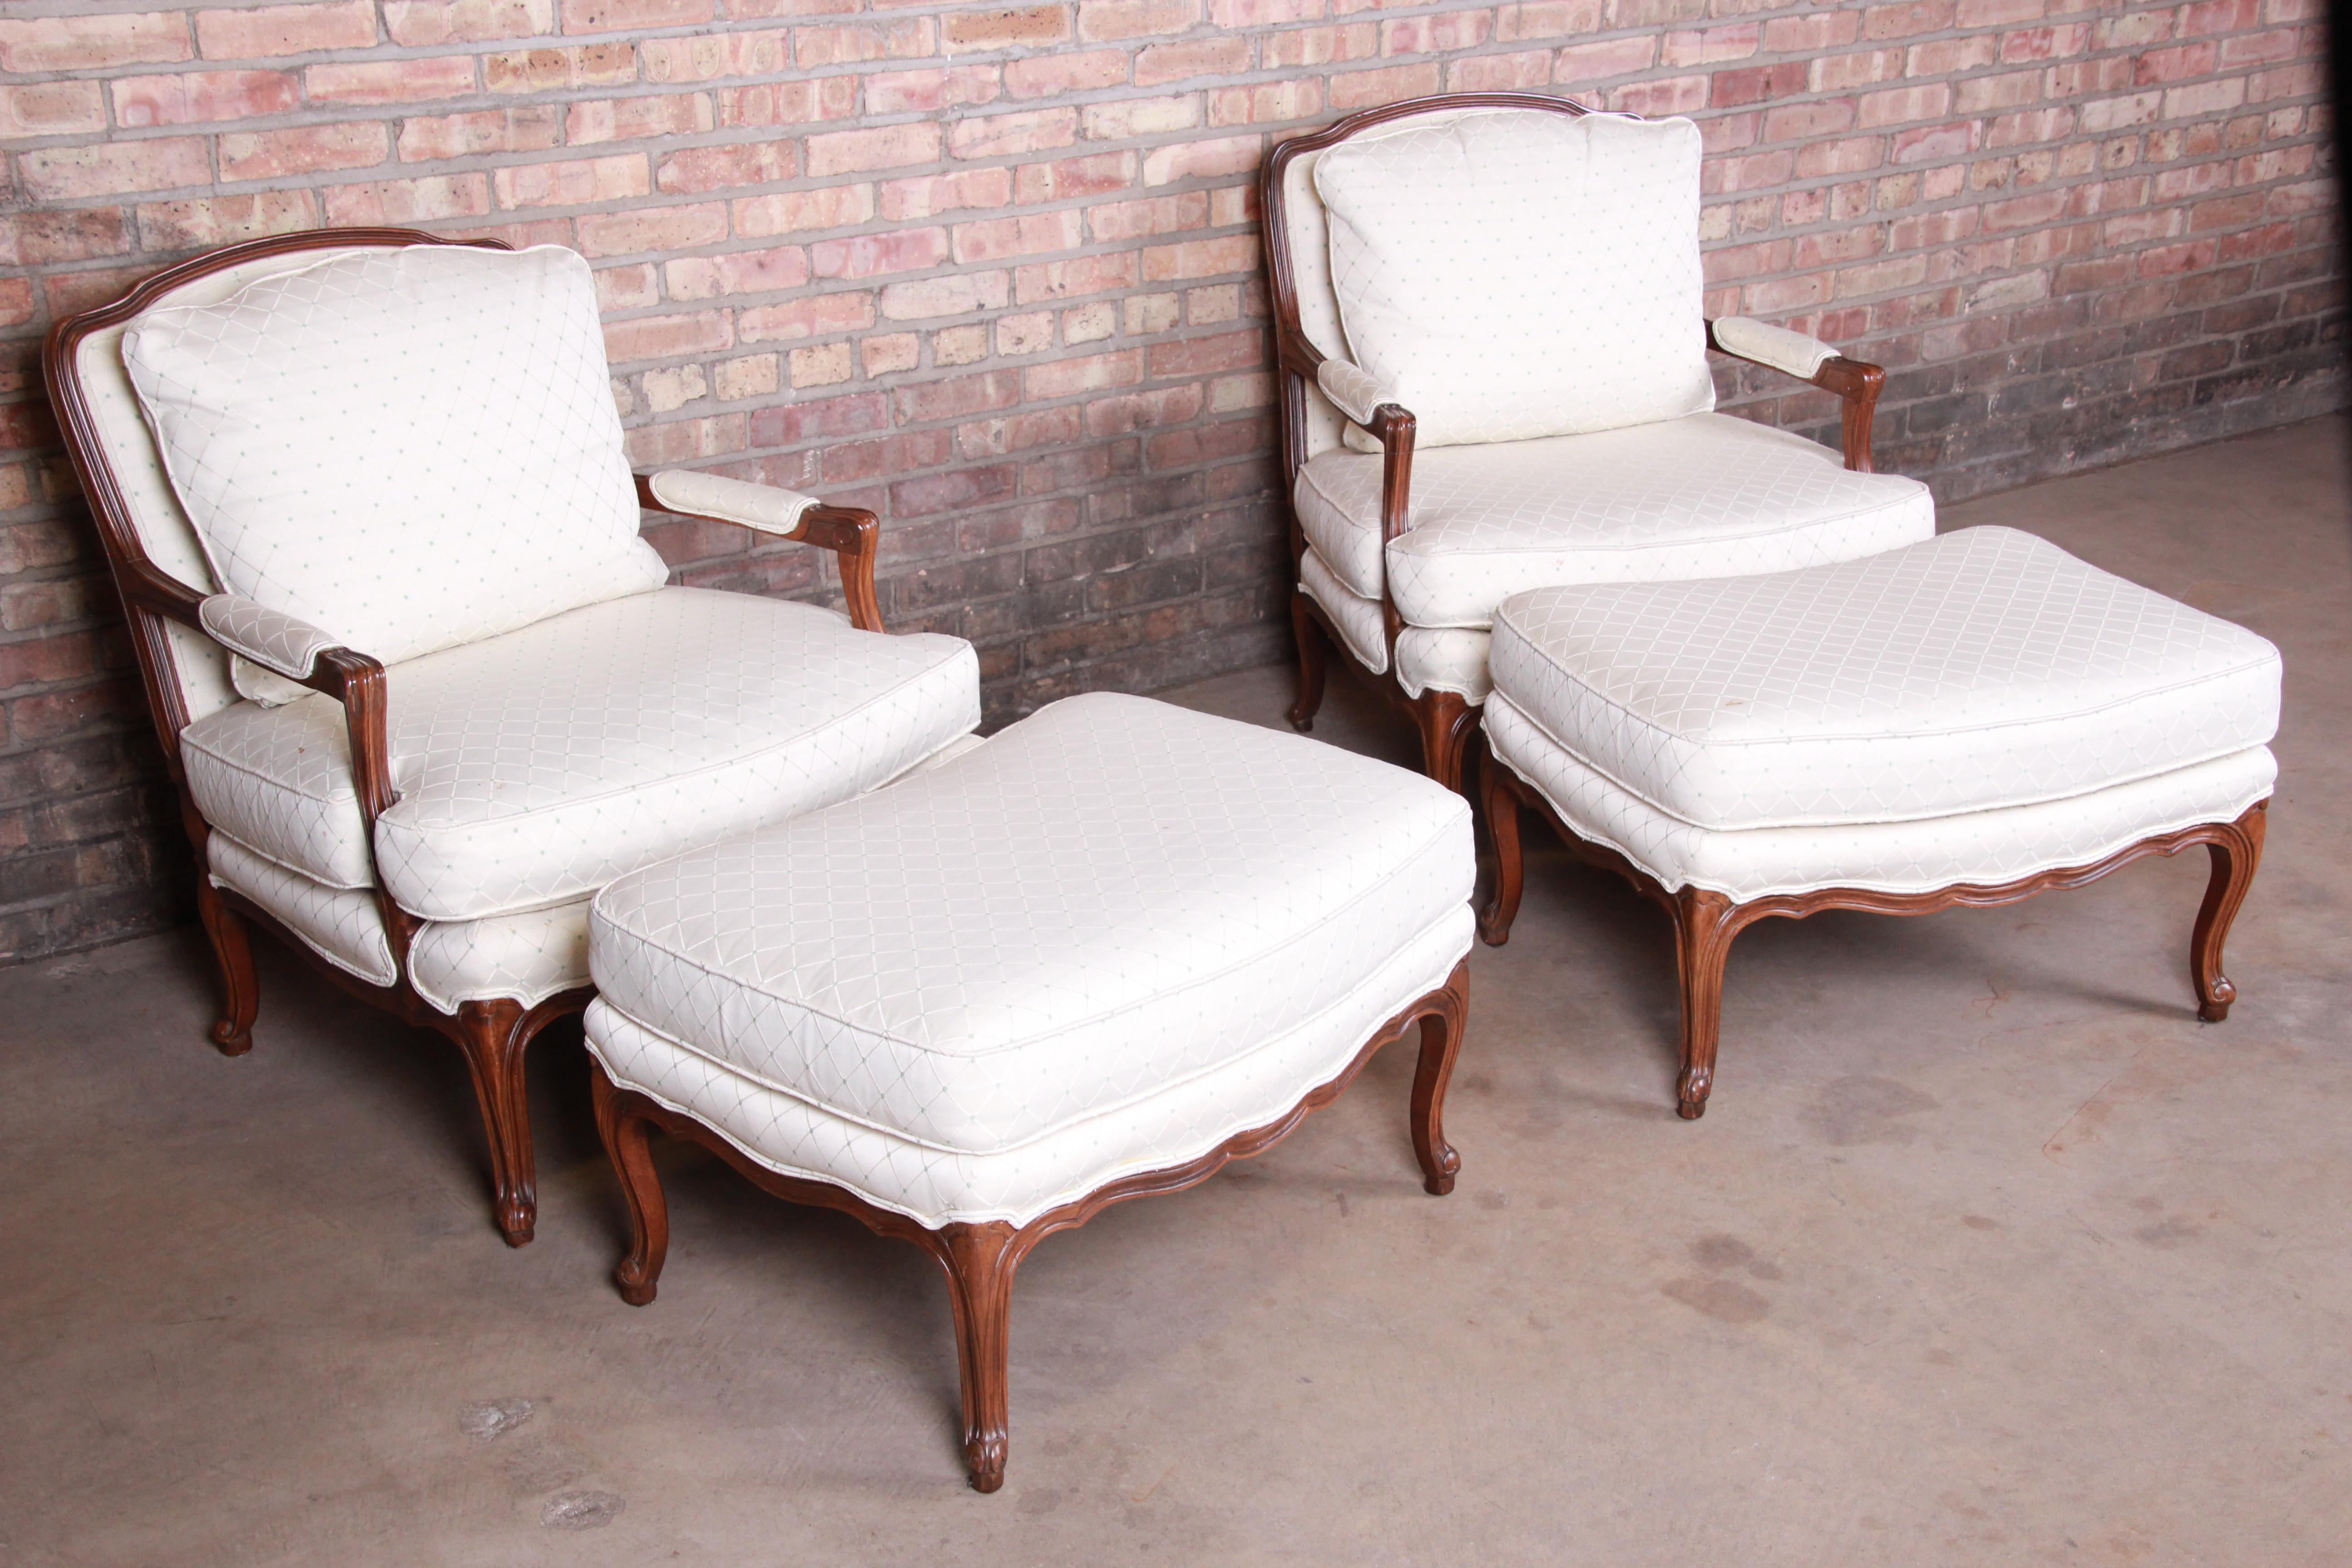 A gorgeous pair of French Provincial Louis XV bergère chairs with matching ottomans

By Baker Furniture

USA, 20th century

Carved walnut frames, with upholstered seats and backs.

Measures:
Chairs - 30